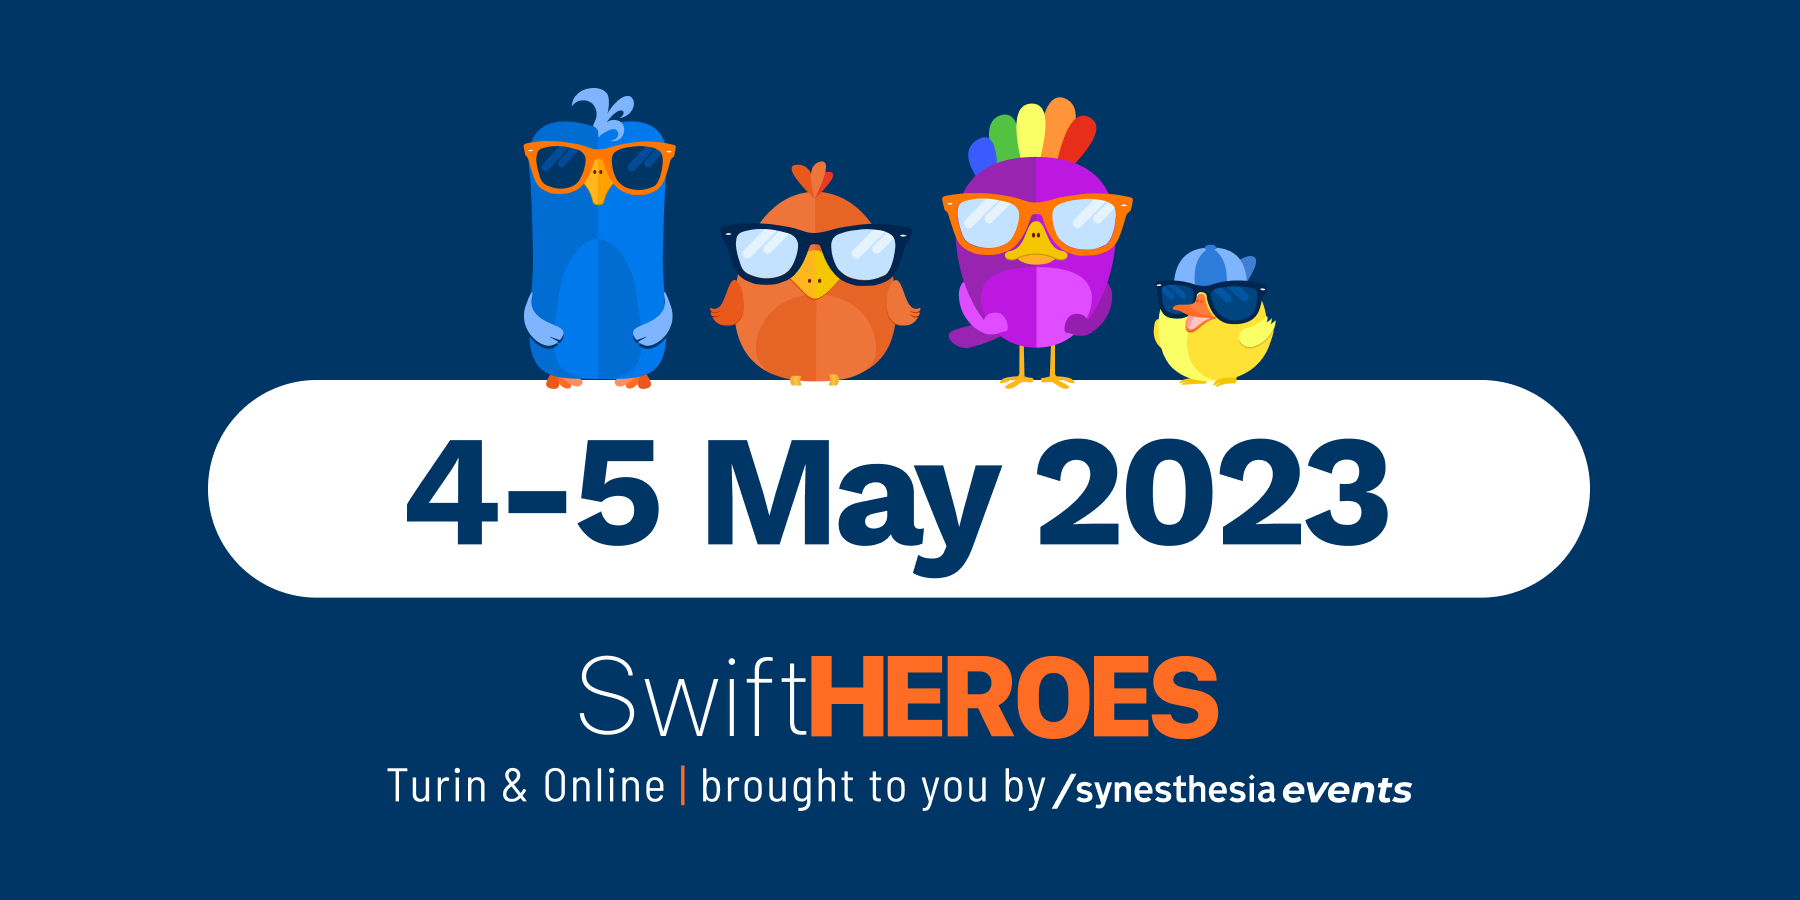 Swift Heroes 2023 4 and 5 May Conference by Synesthesia